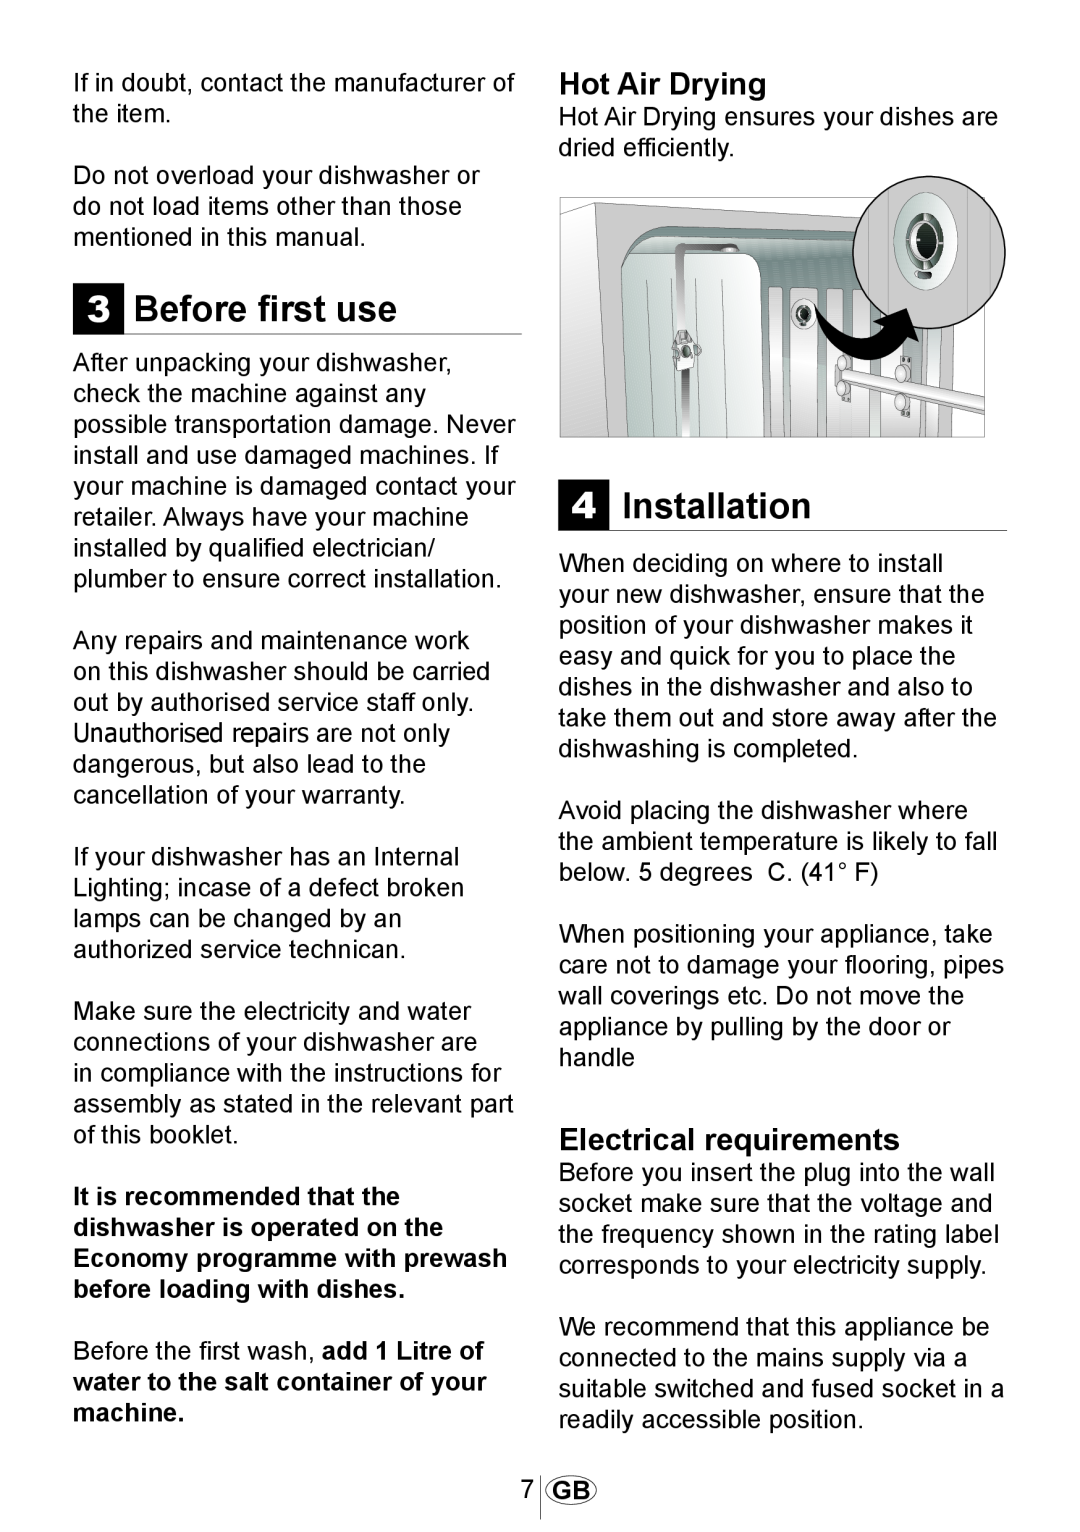 Beko DSFN 1532 manual 3Before first use, 4Installation, Hot Air Drying, Electrical requirements 